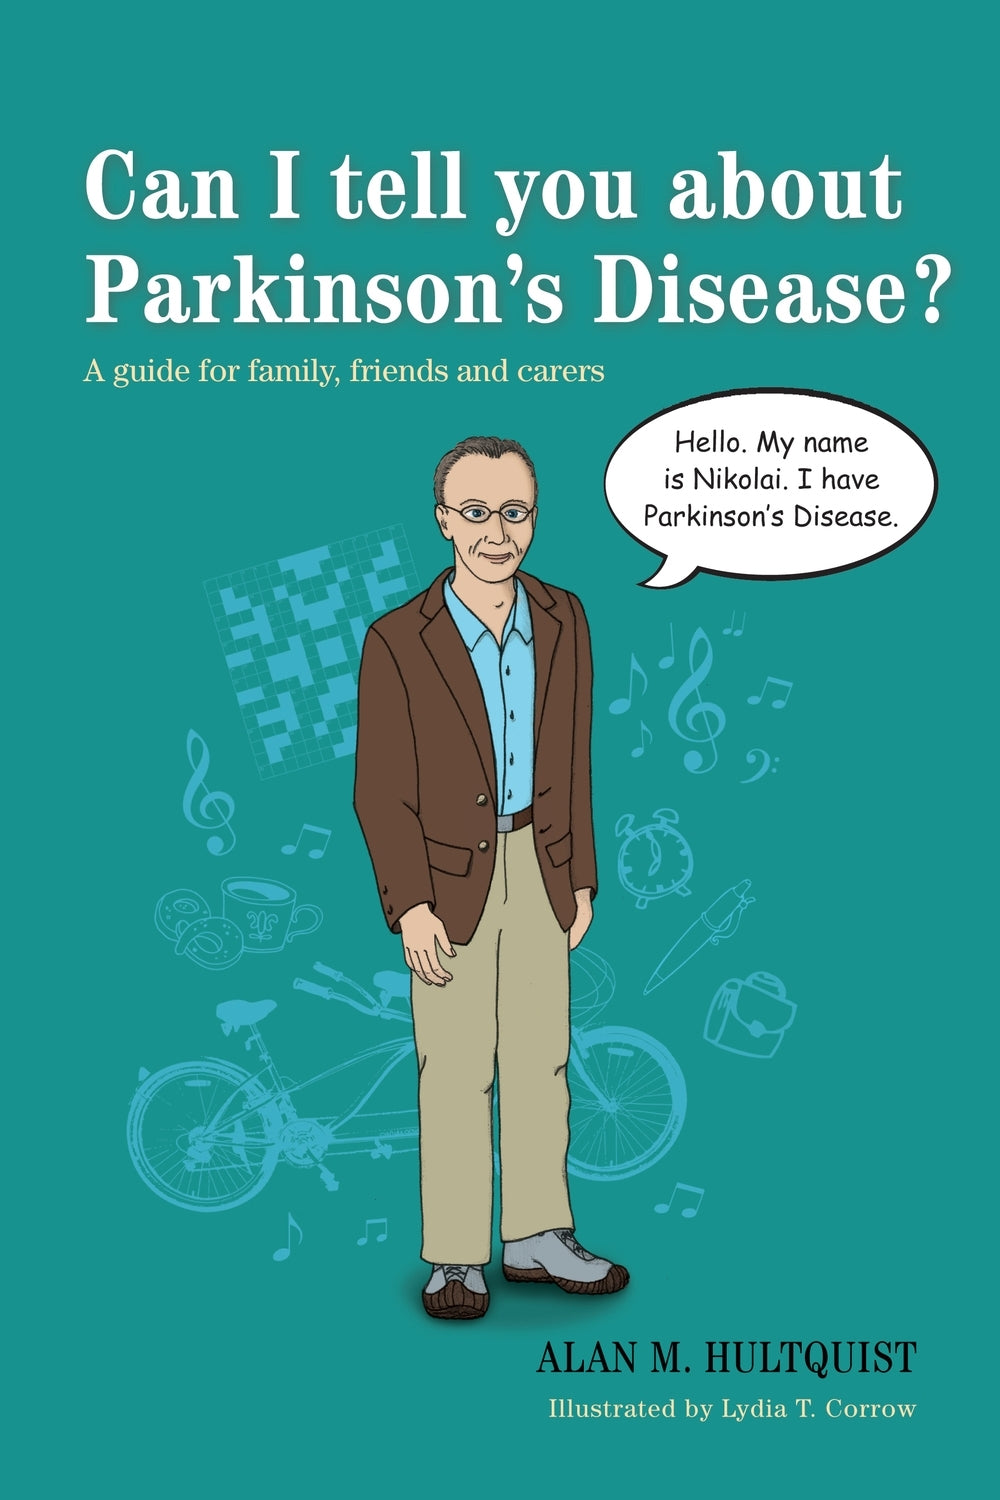 Can I tell you about Parkinson's Disease? by Alan M. Hultquist, Lydia Corrow